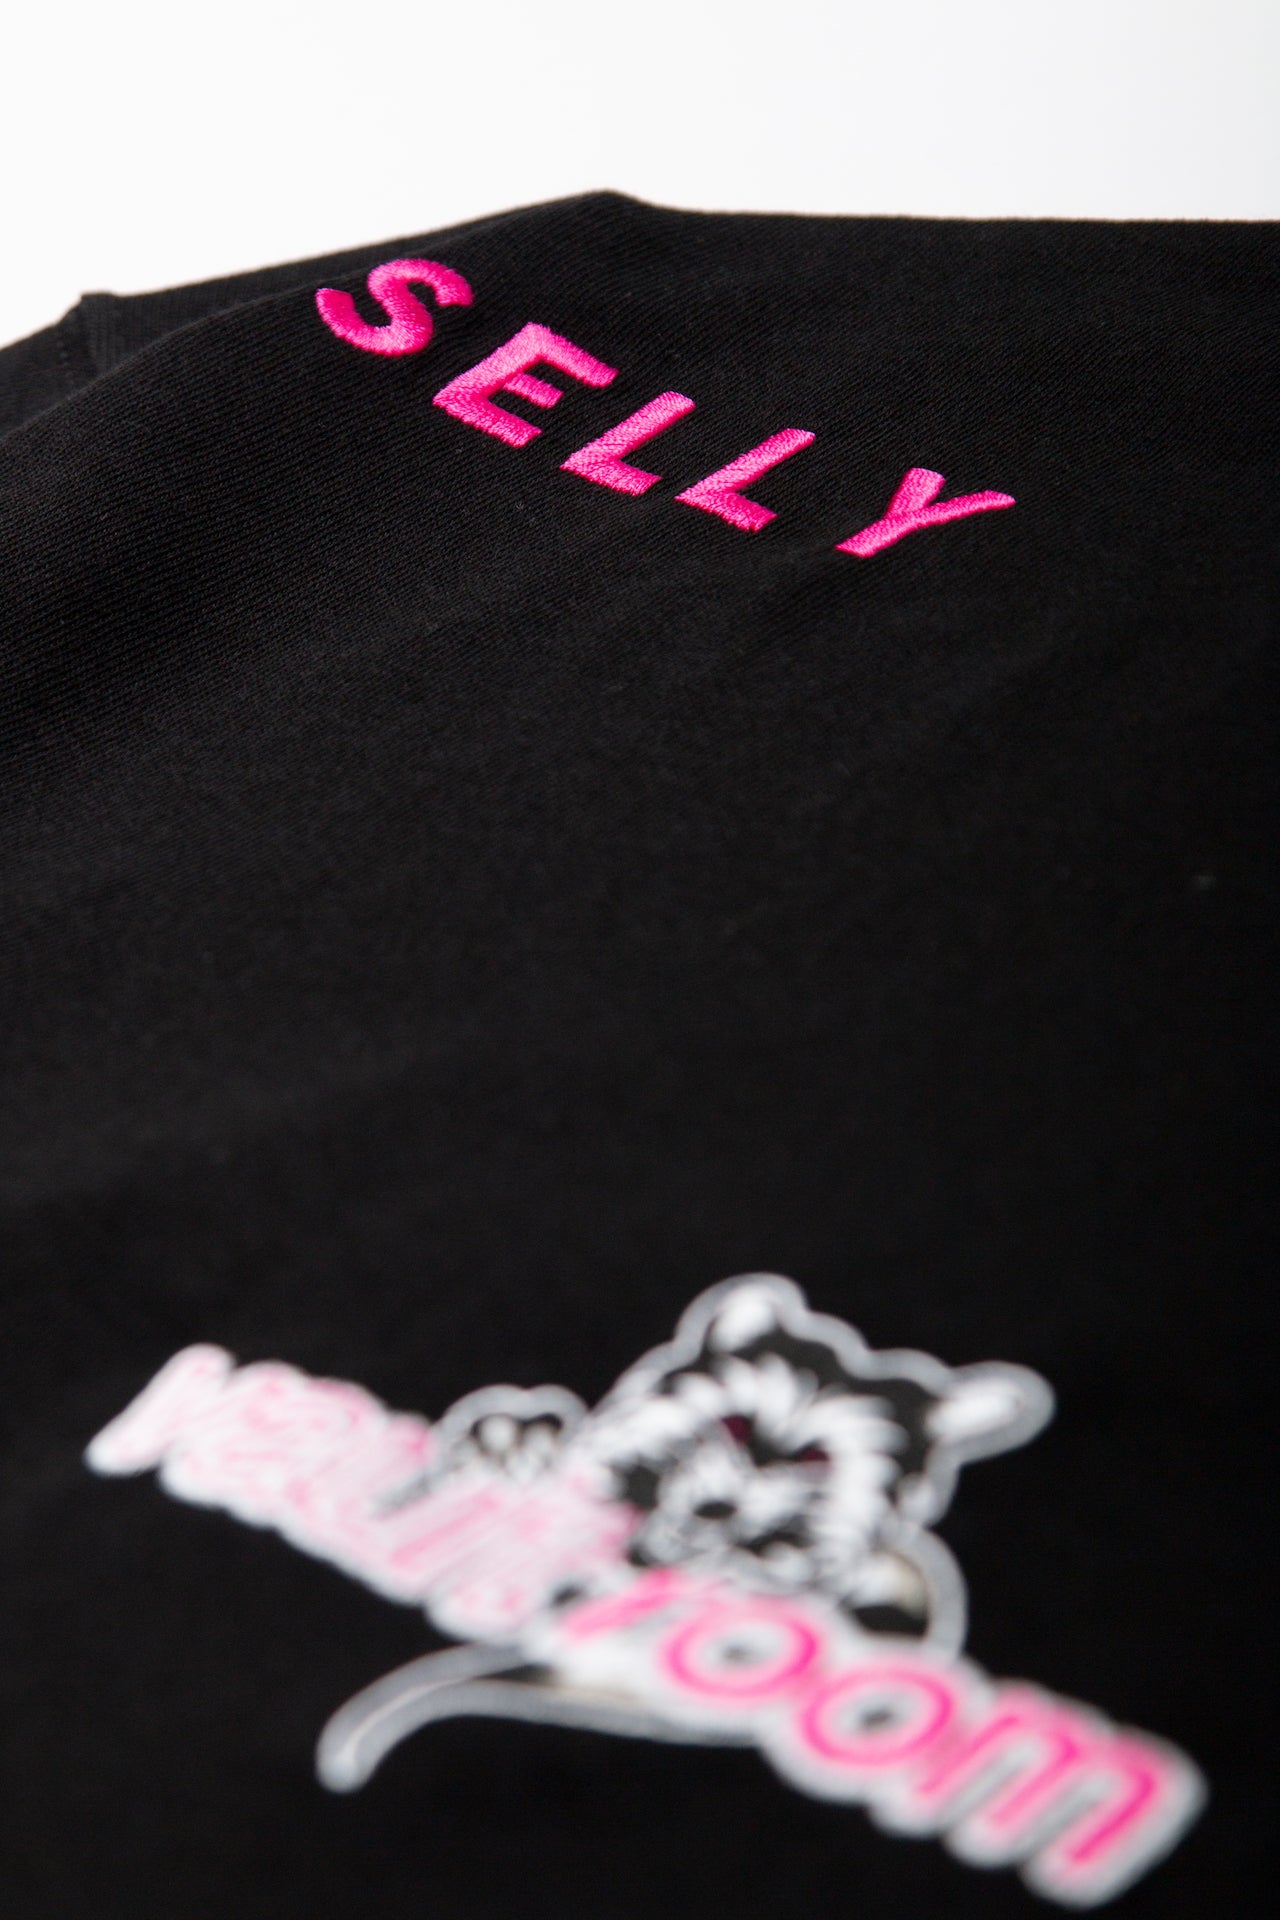 vaultroom × Selly / BLK